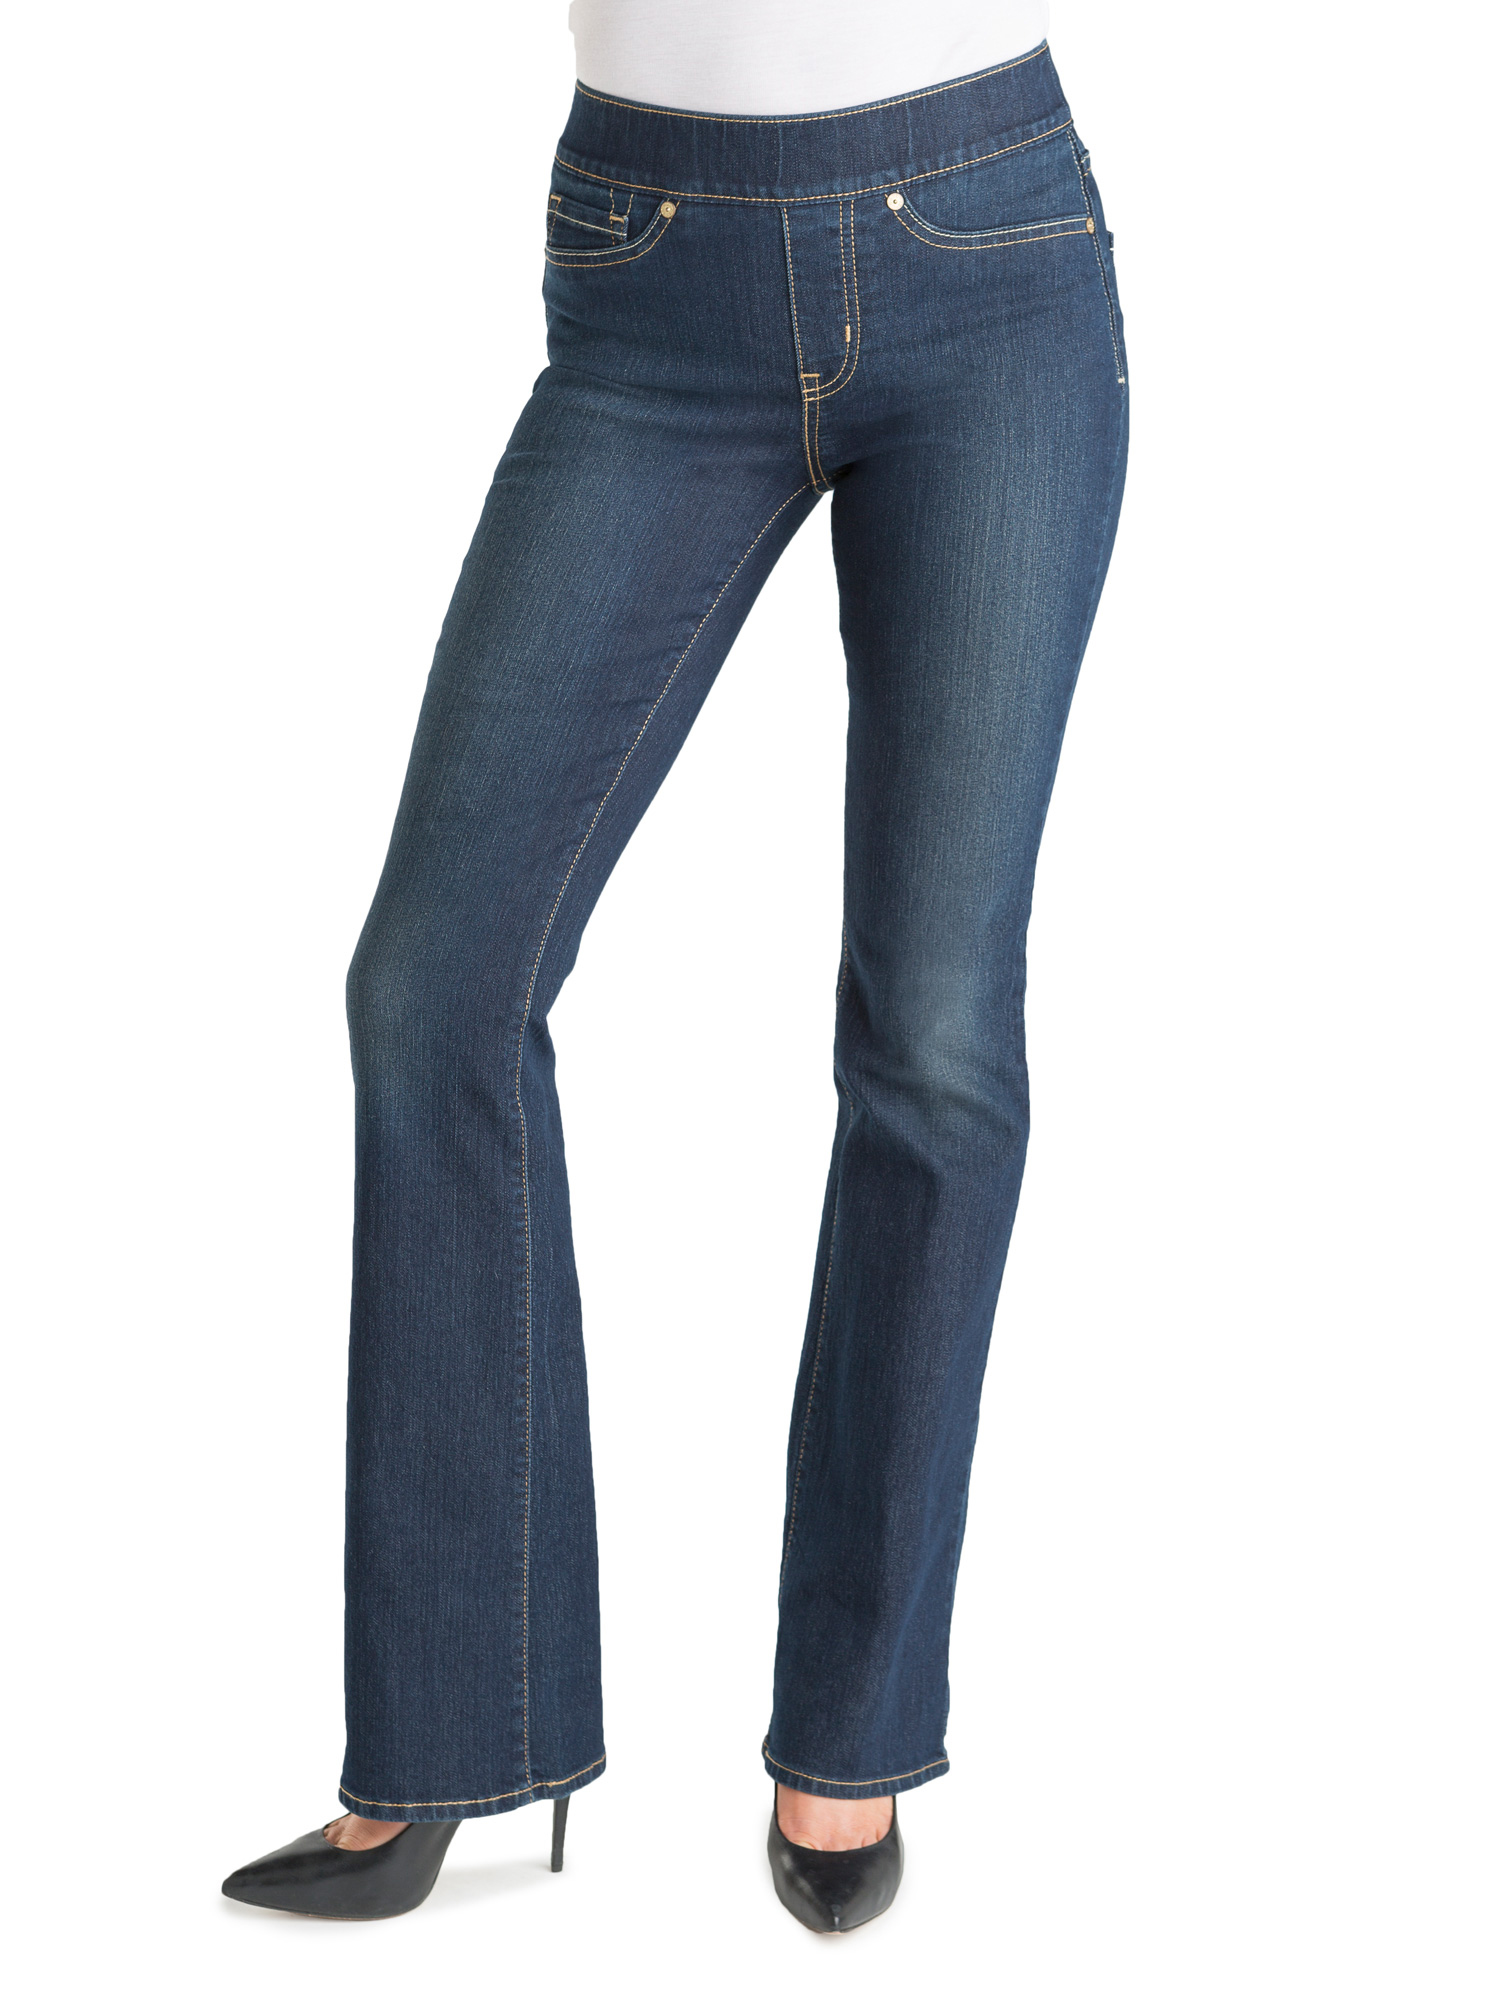 Signature by Levi Strauss & Co. Women's Totally Shaping Pull On Bootcut Jeans - image 1 of 2